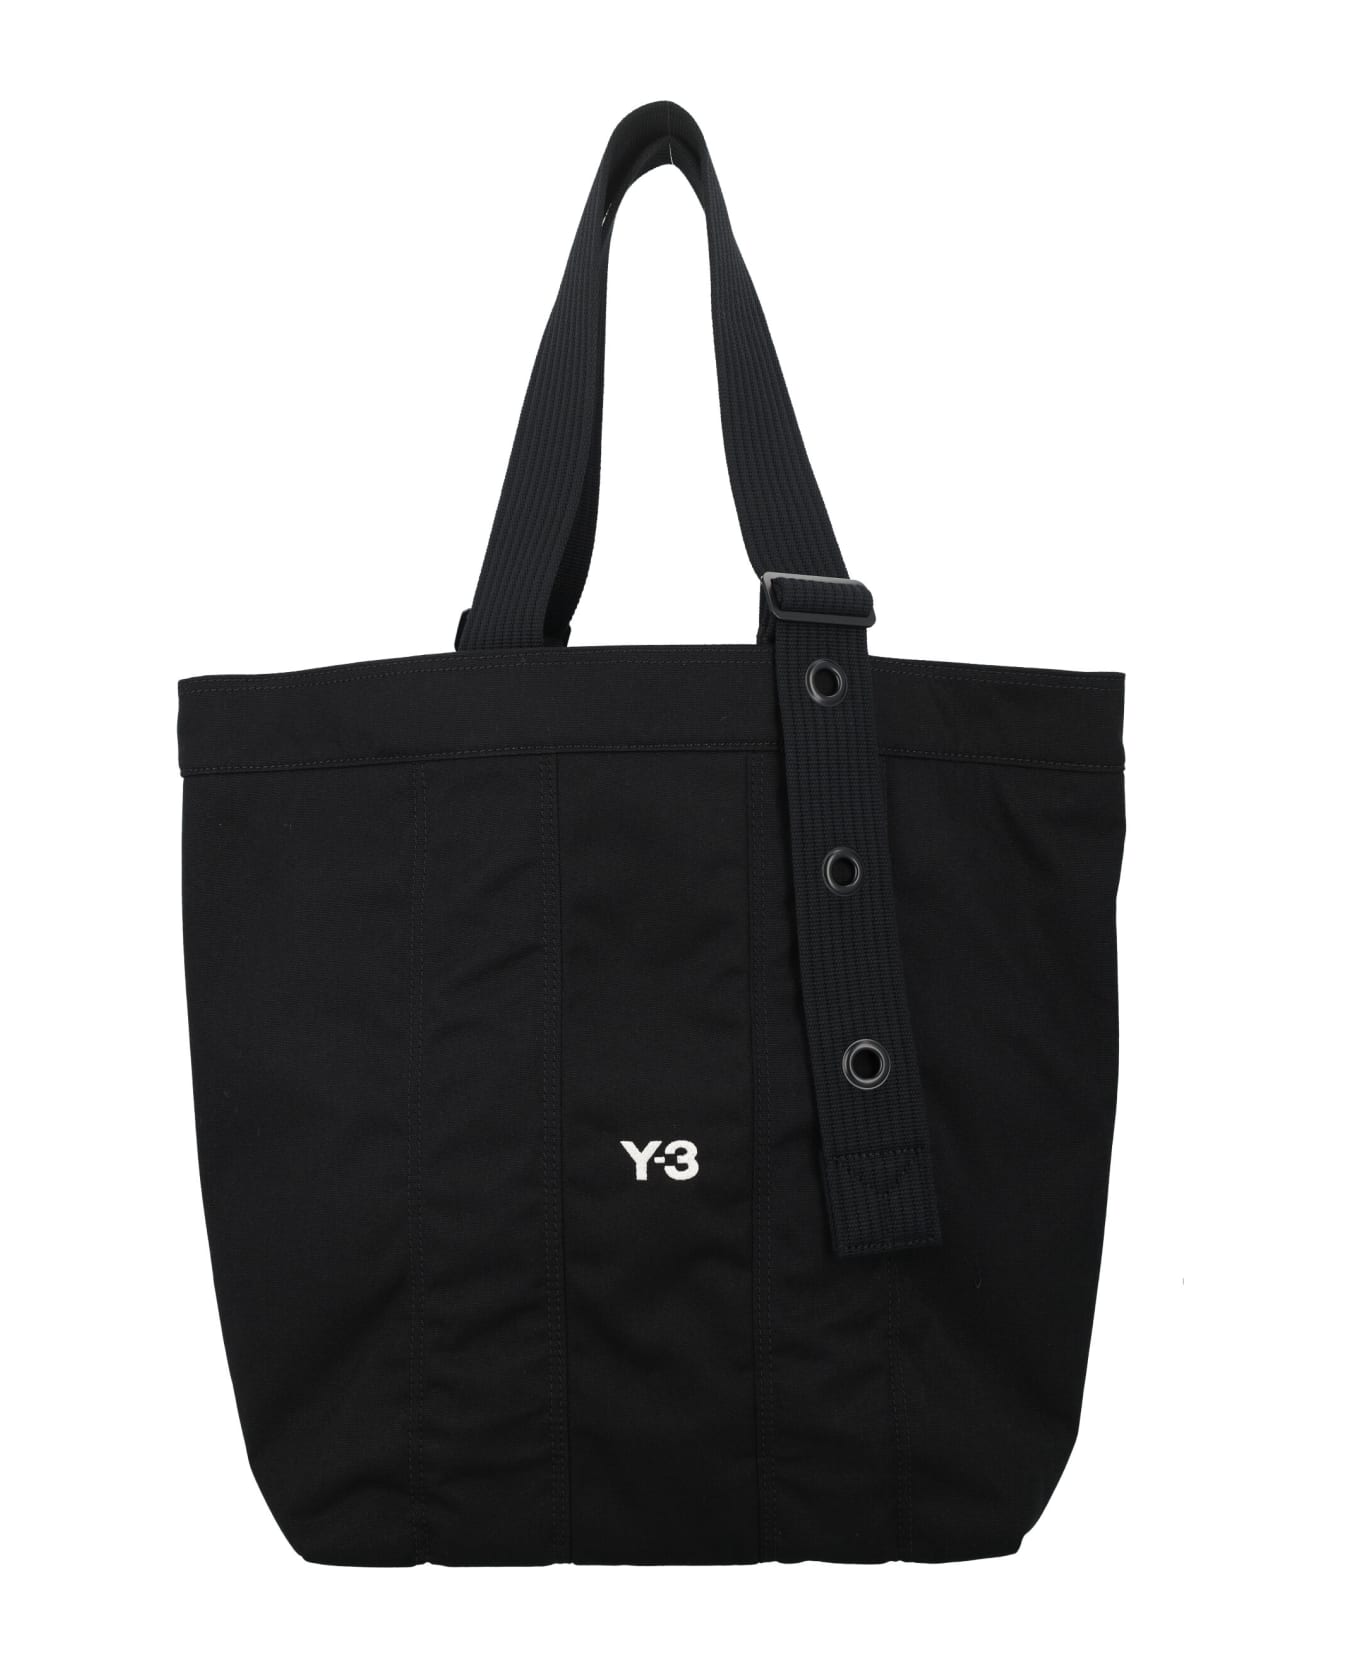 Y-3 Tote - BLACK トートバッグ